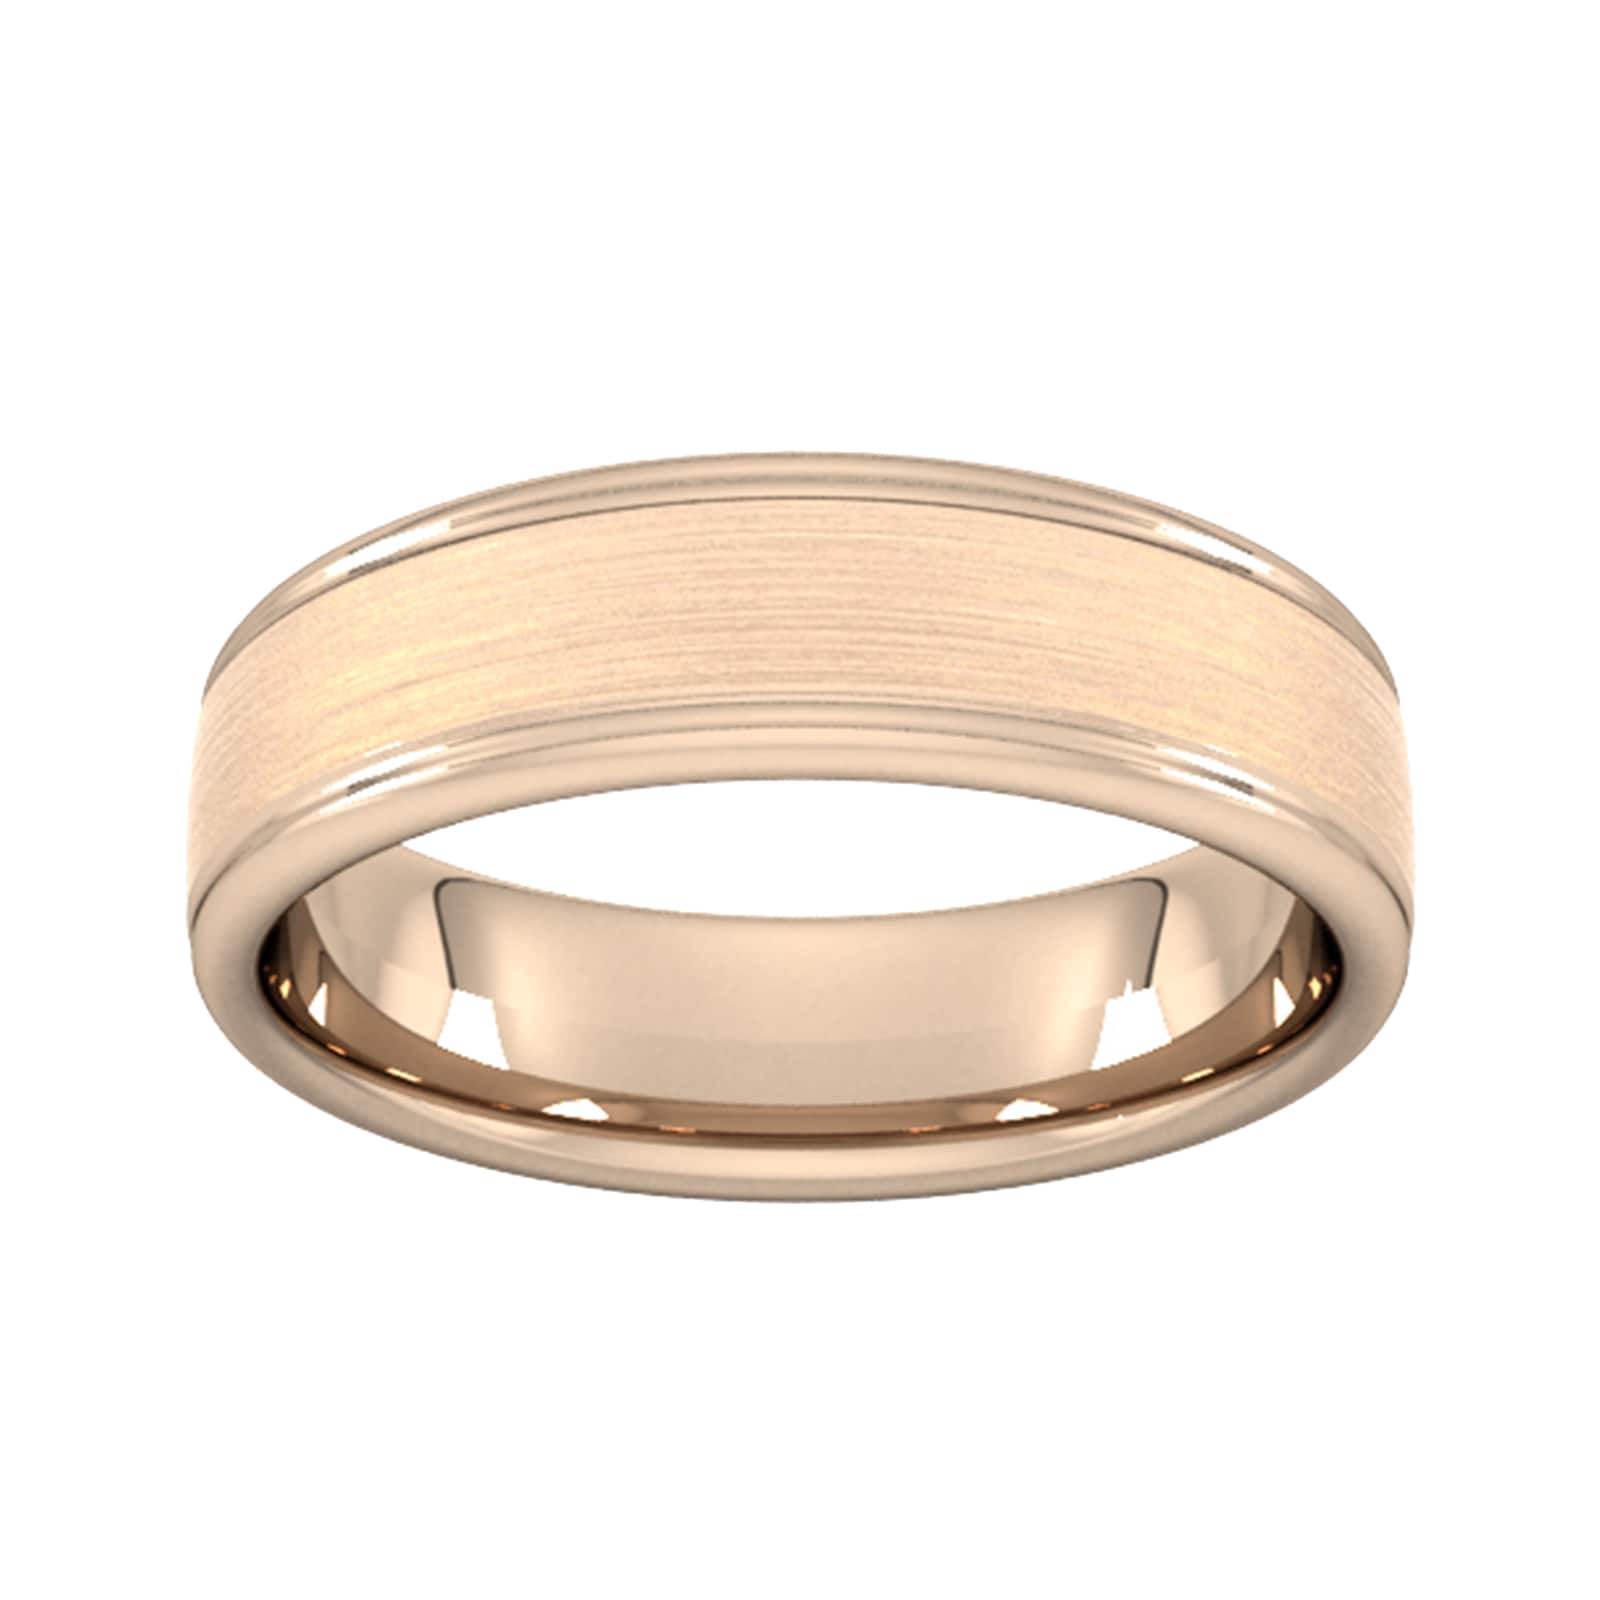 6mm Slight Court Heavy Matt Centre With Grooves Wedding Ring In 18 Carat Rose Gold - Ring Size I